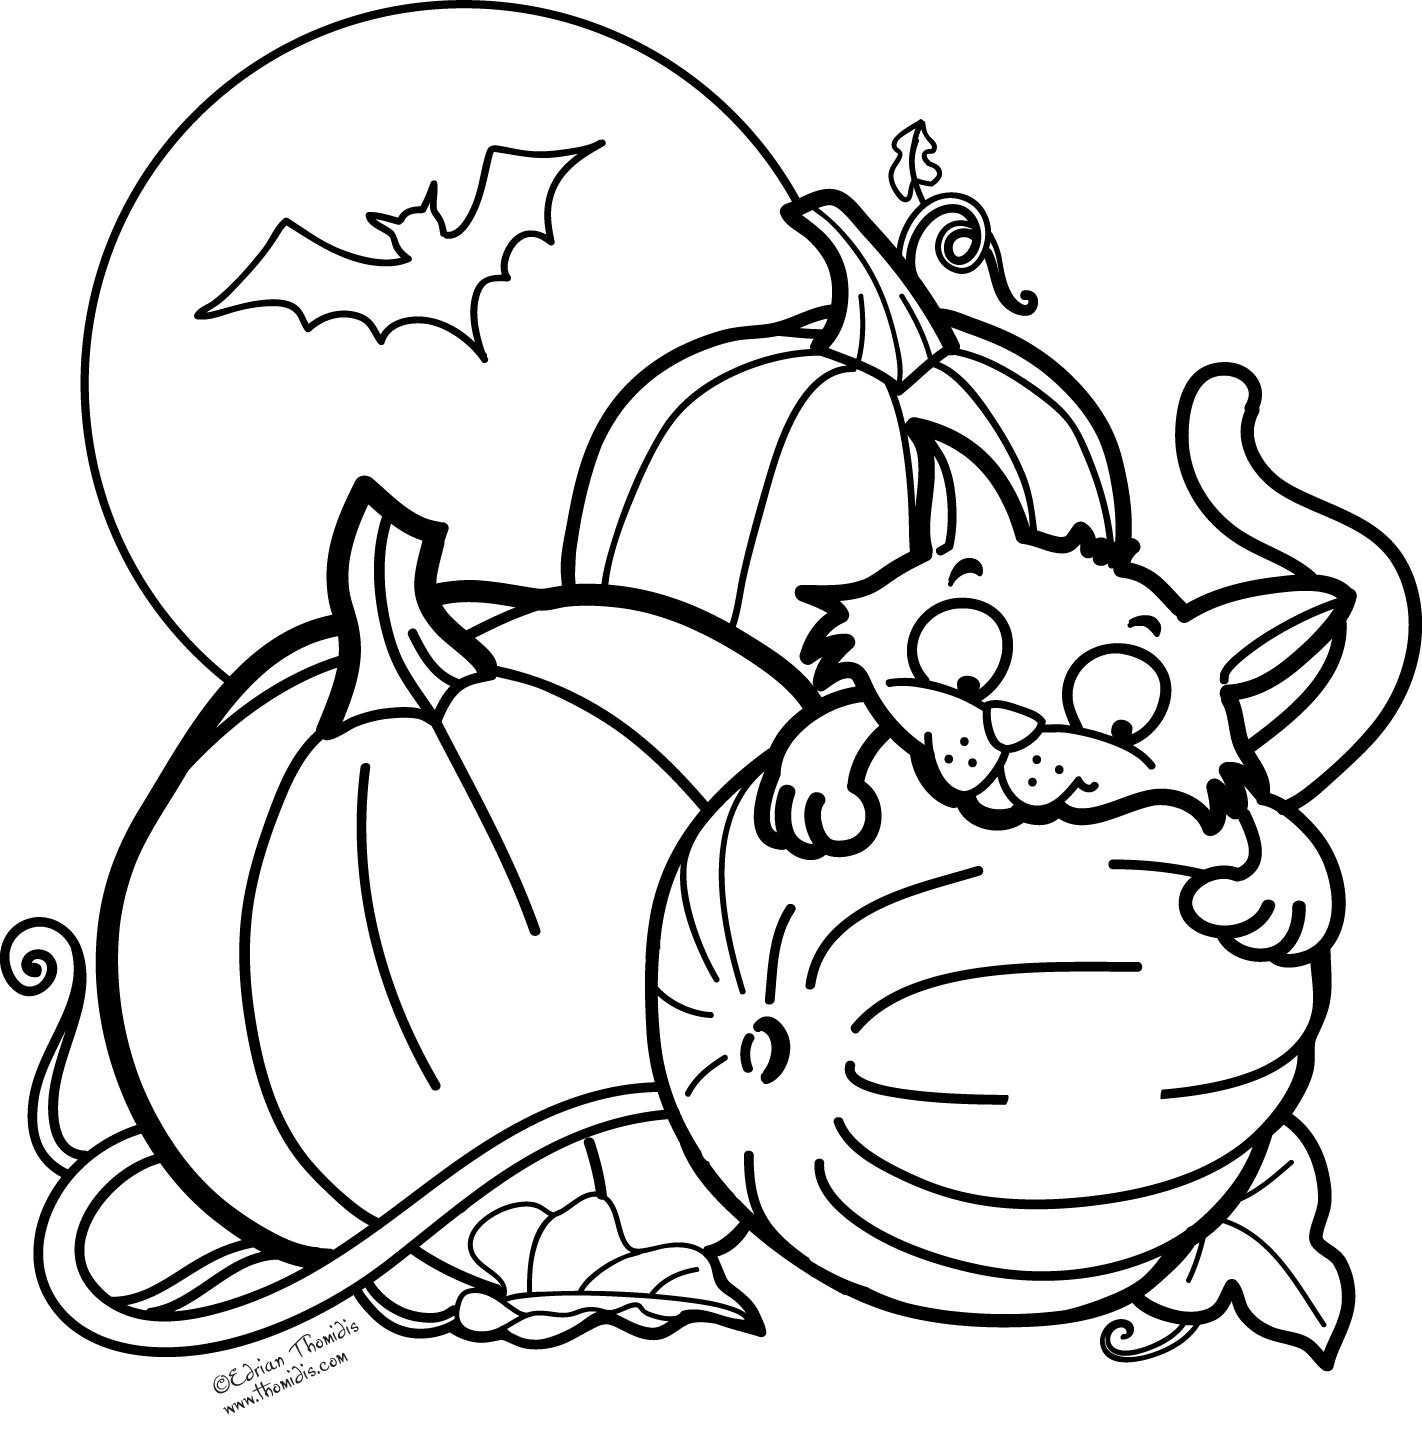 Halloween Kids Coloring Pages
 A picture paints a thousand words Pumpkin Cat and a Bat